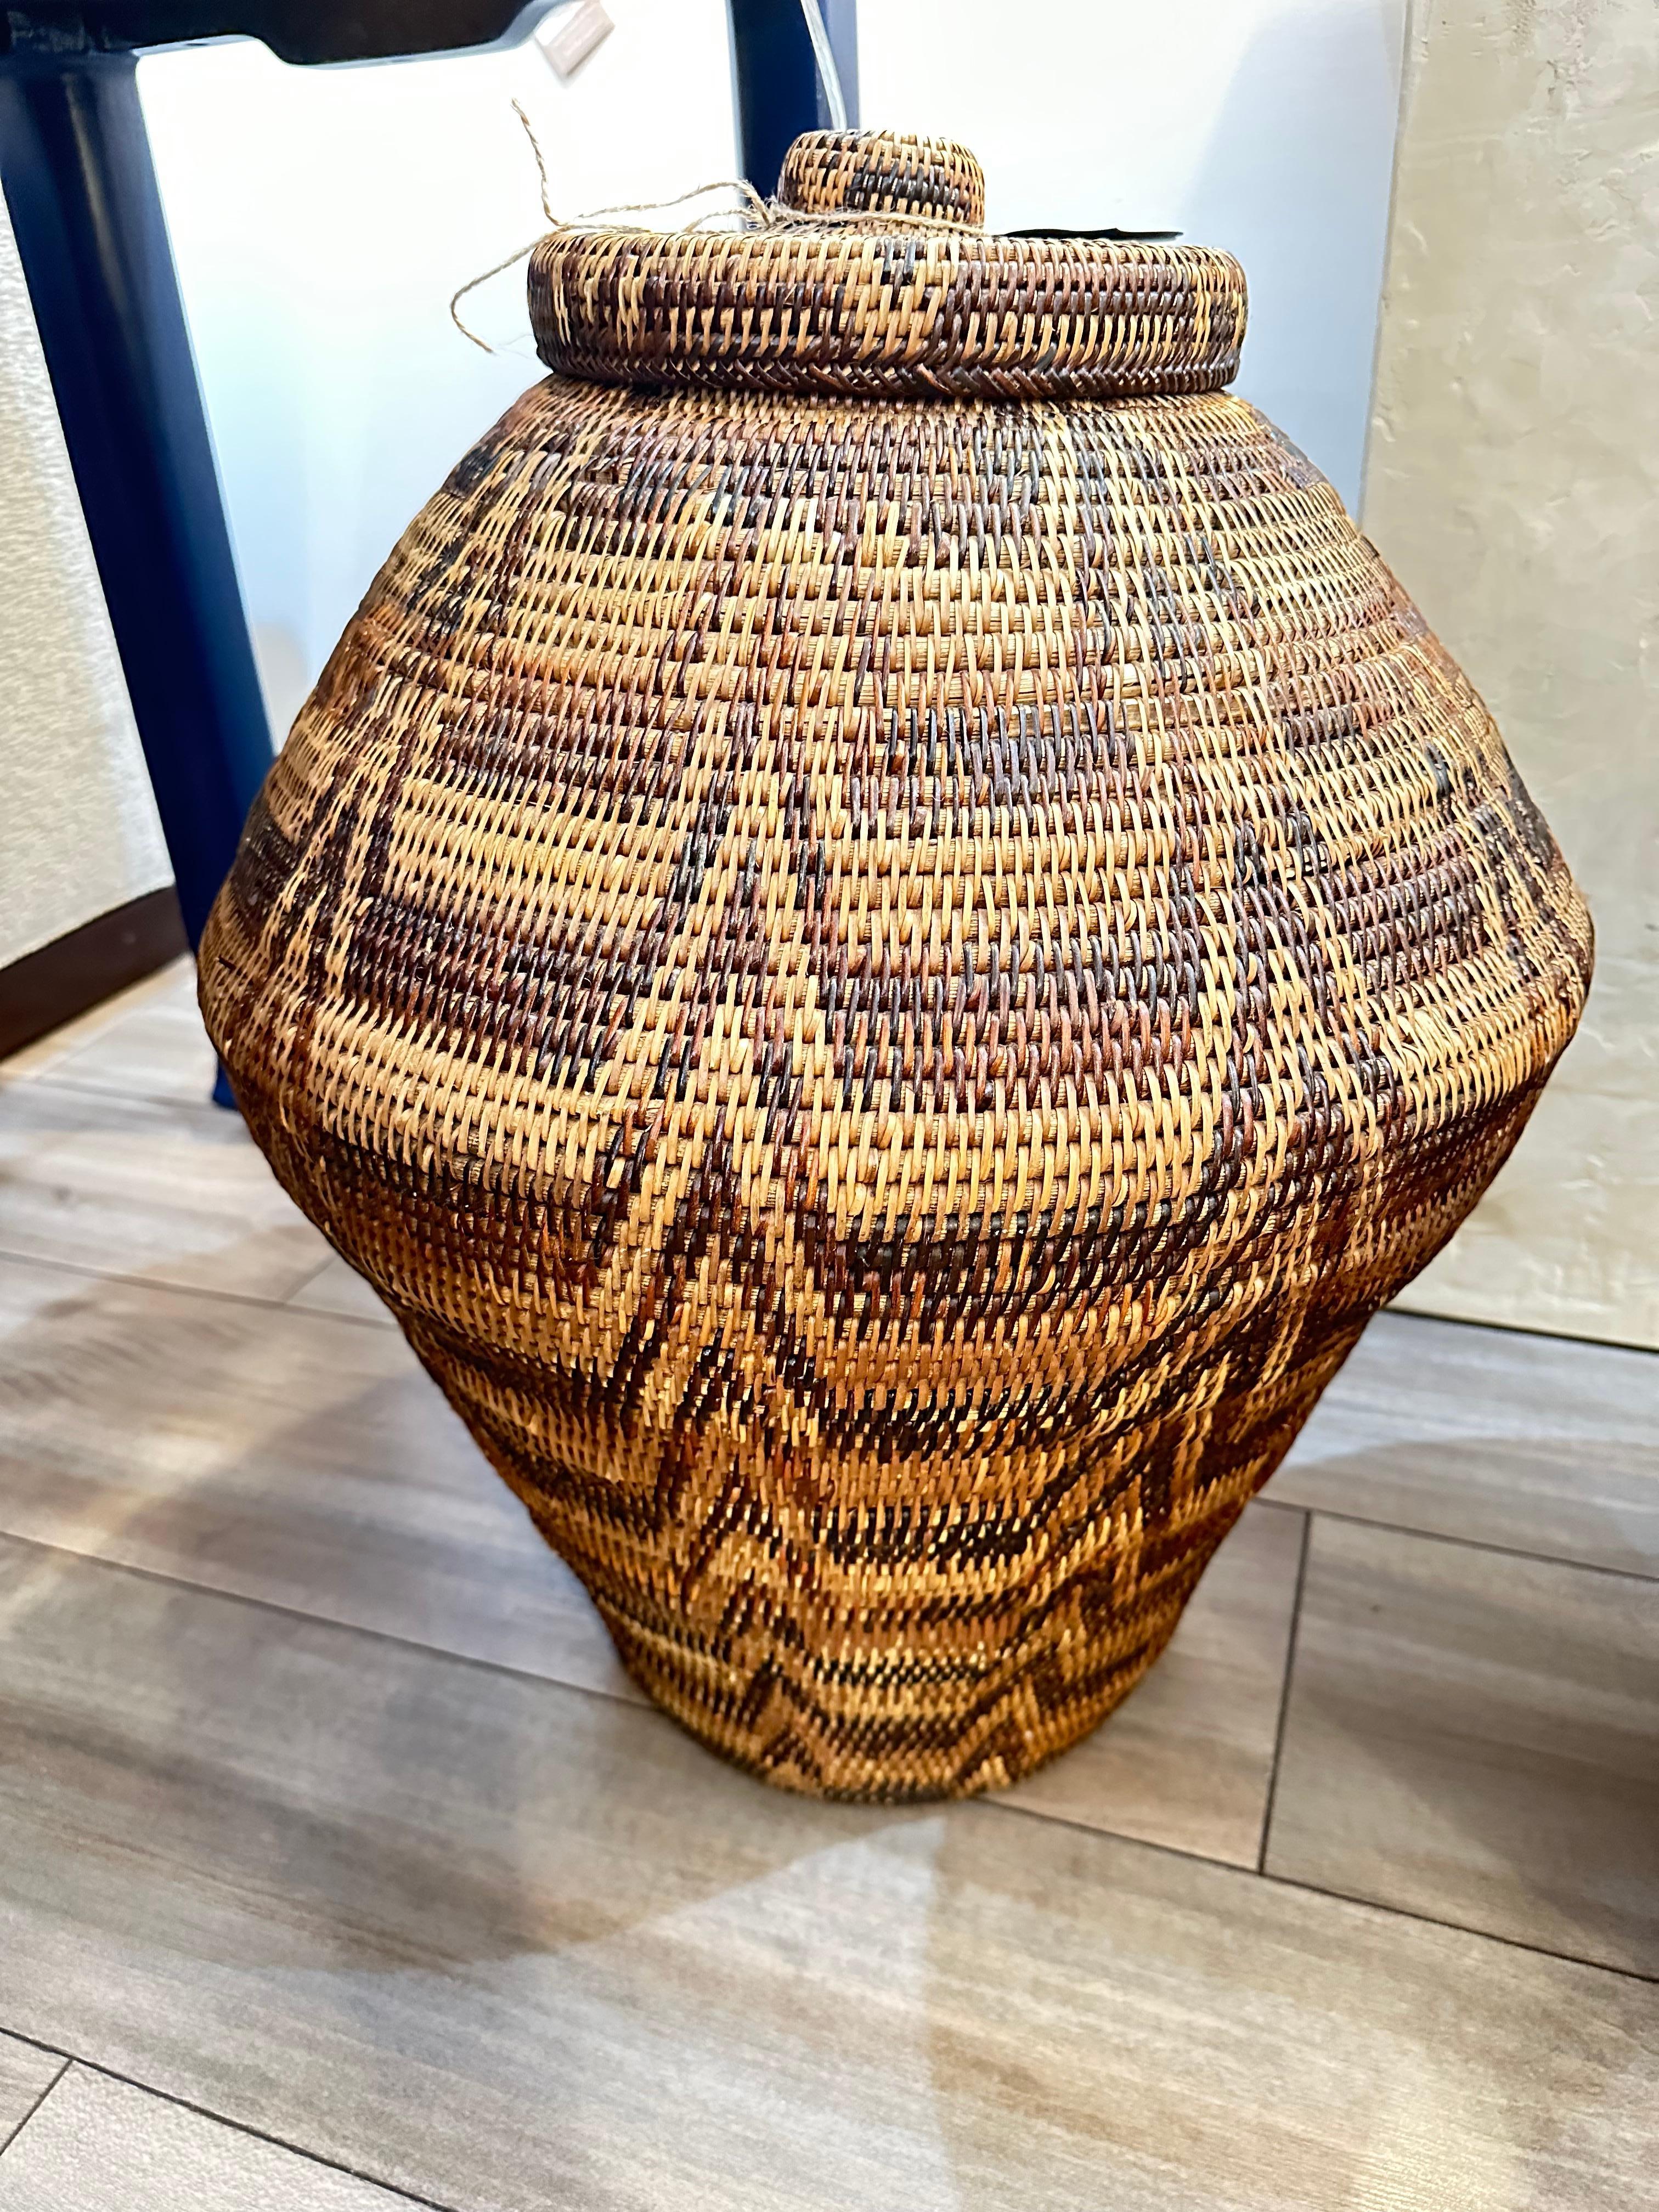 Hand-Woven Unique Collection of African Decorative Baskets 